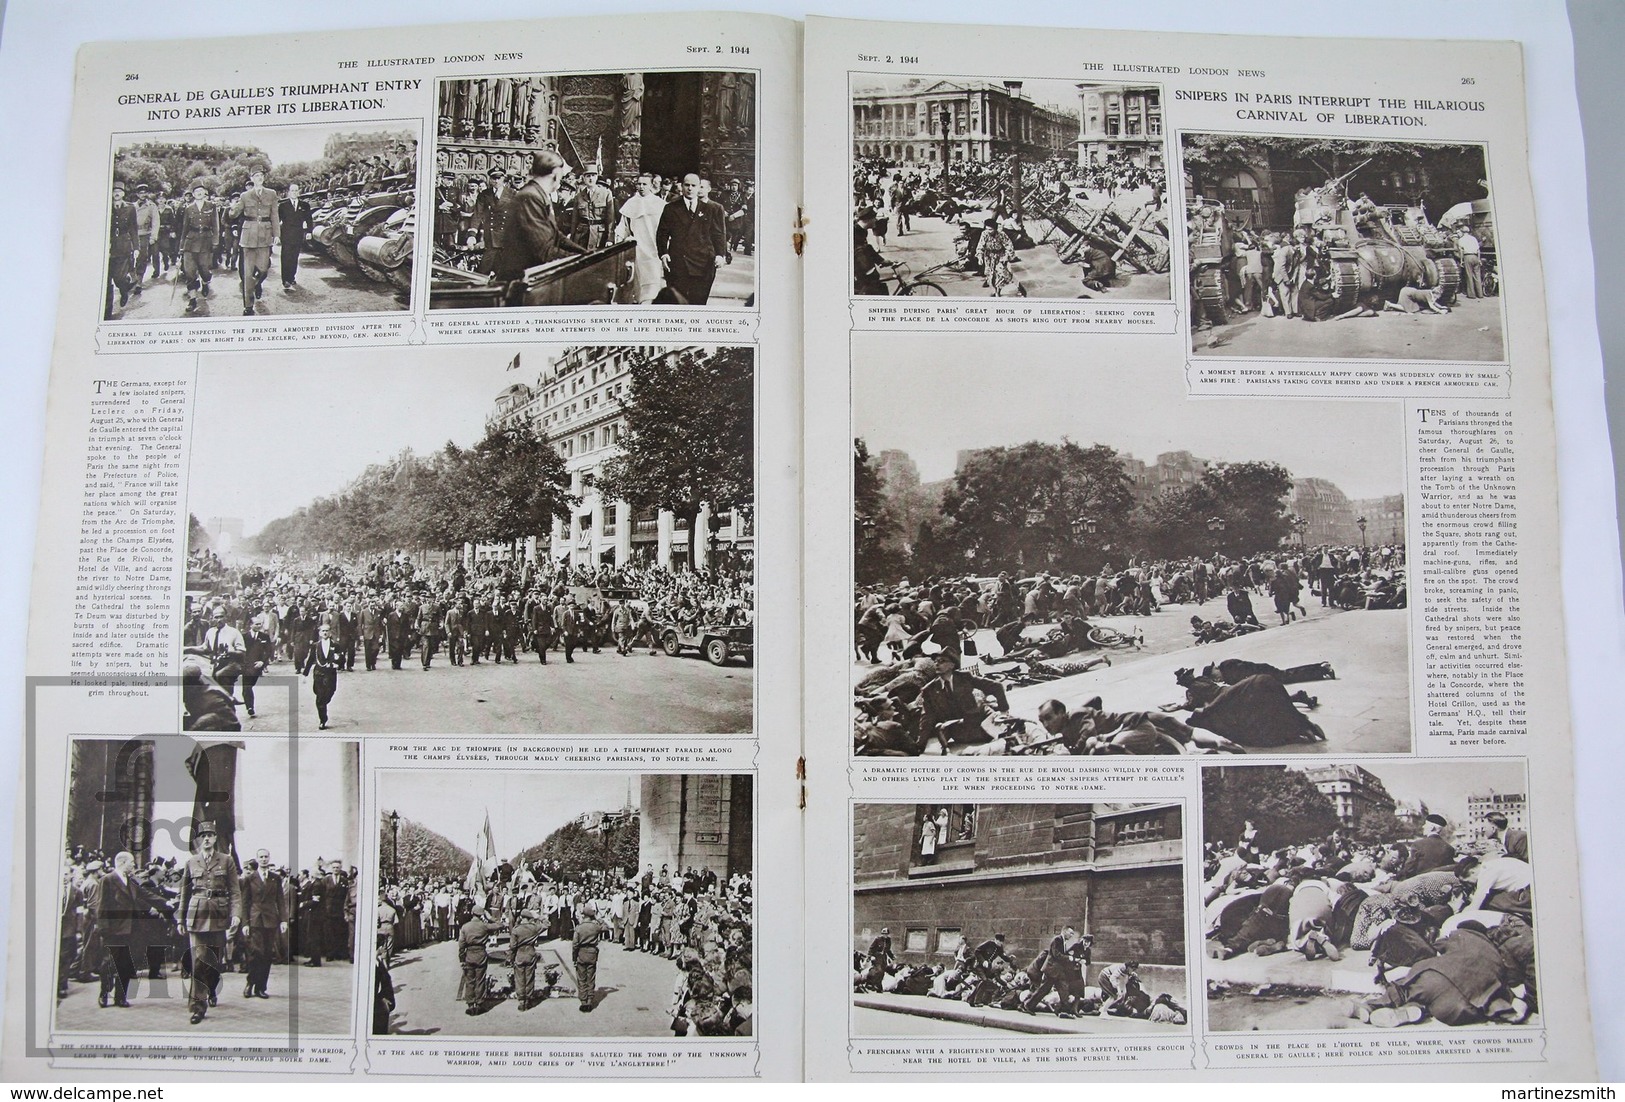 WWII The Illustrated London News, September 2, 1944 - Bernard Montgomery And His Generals, General De Gaulle - History